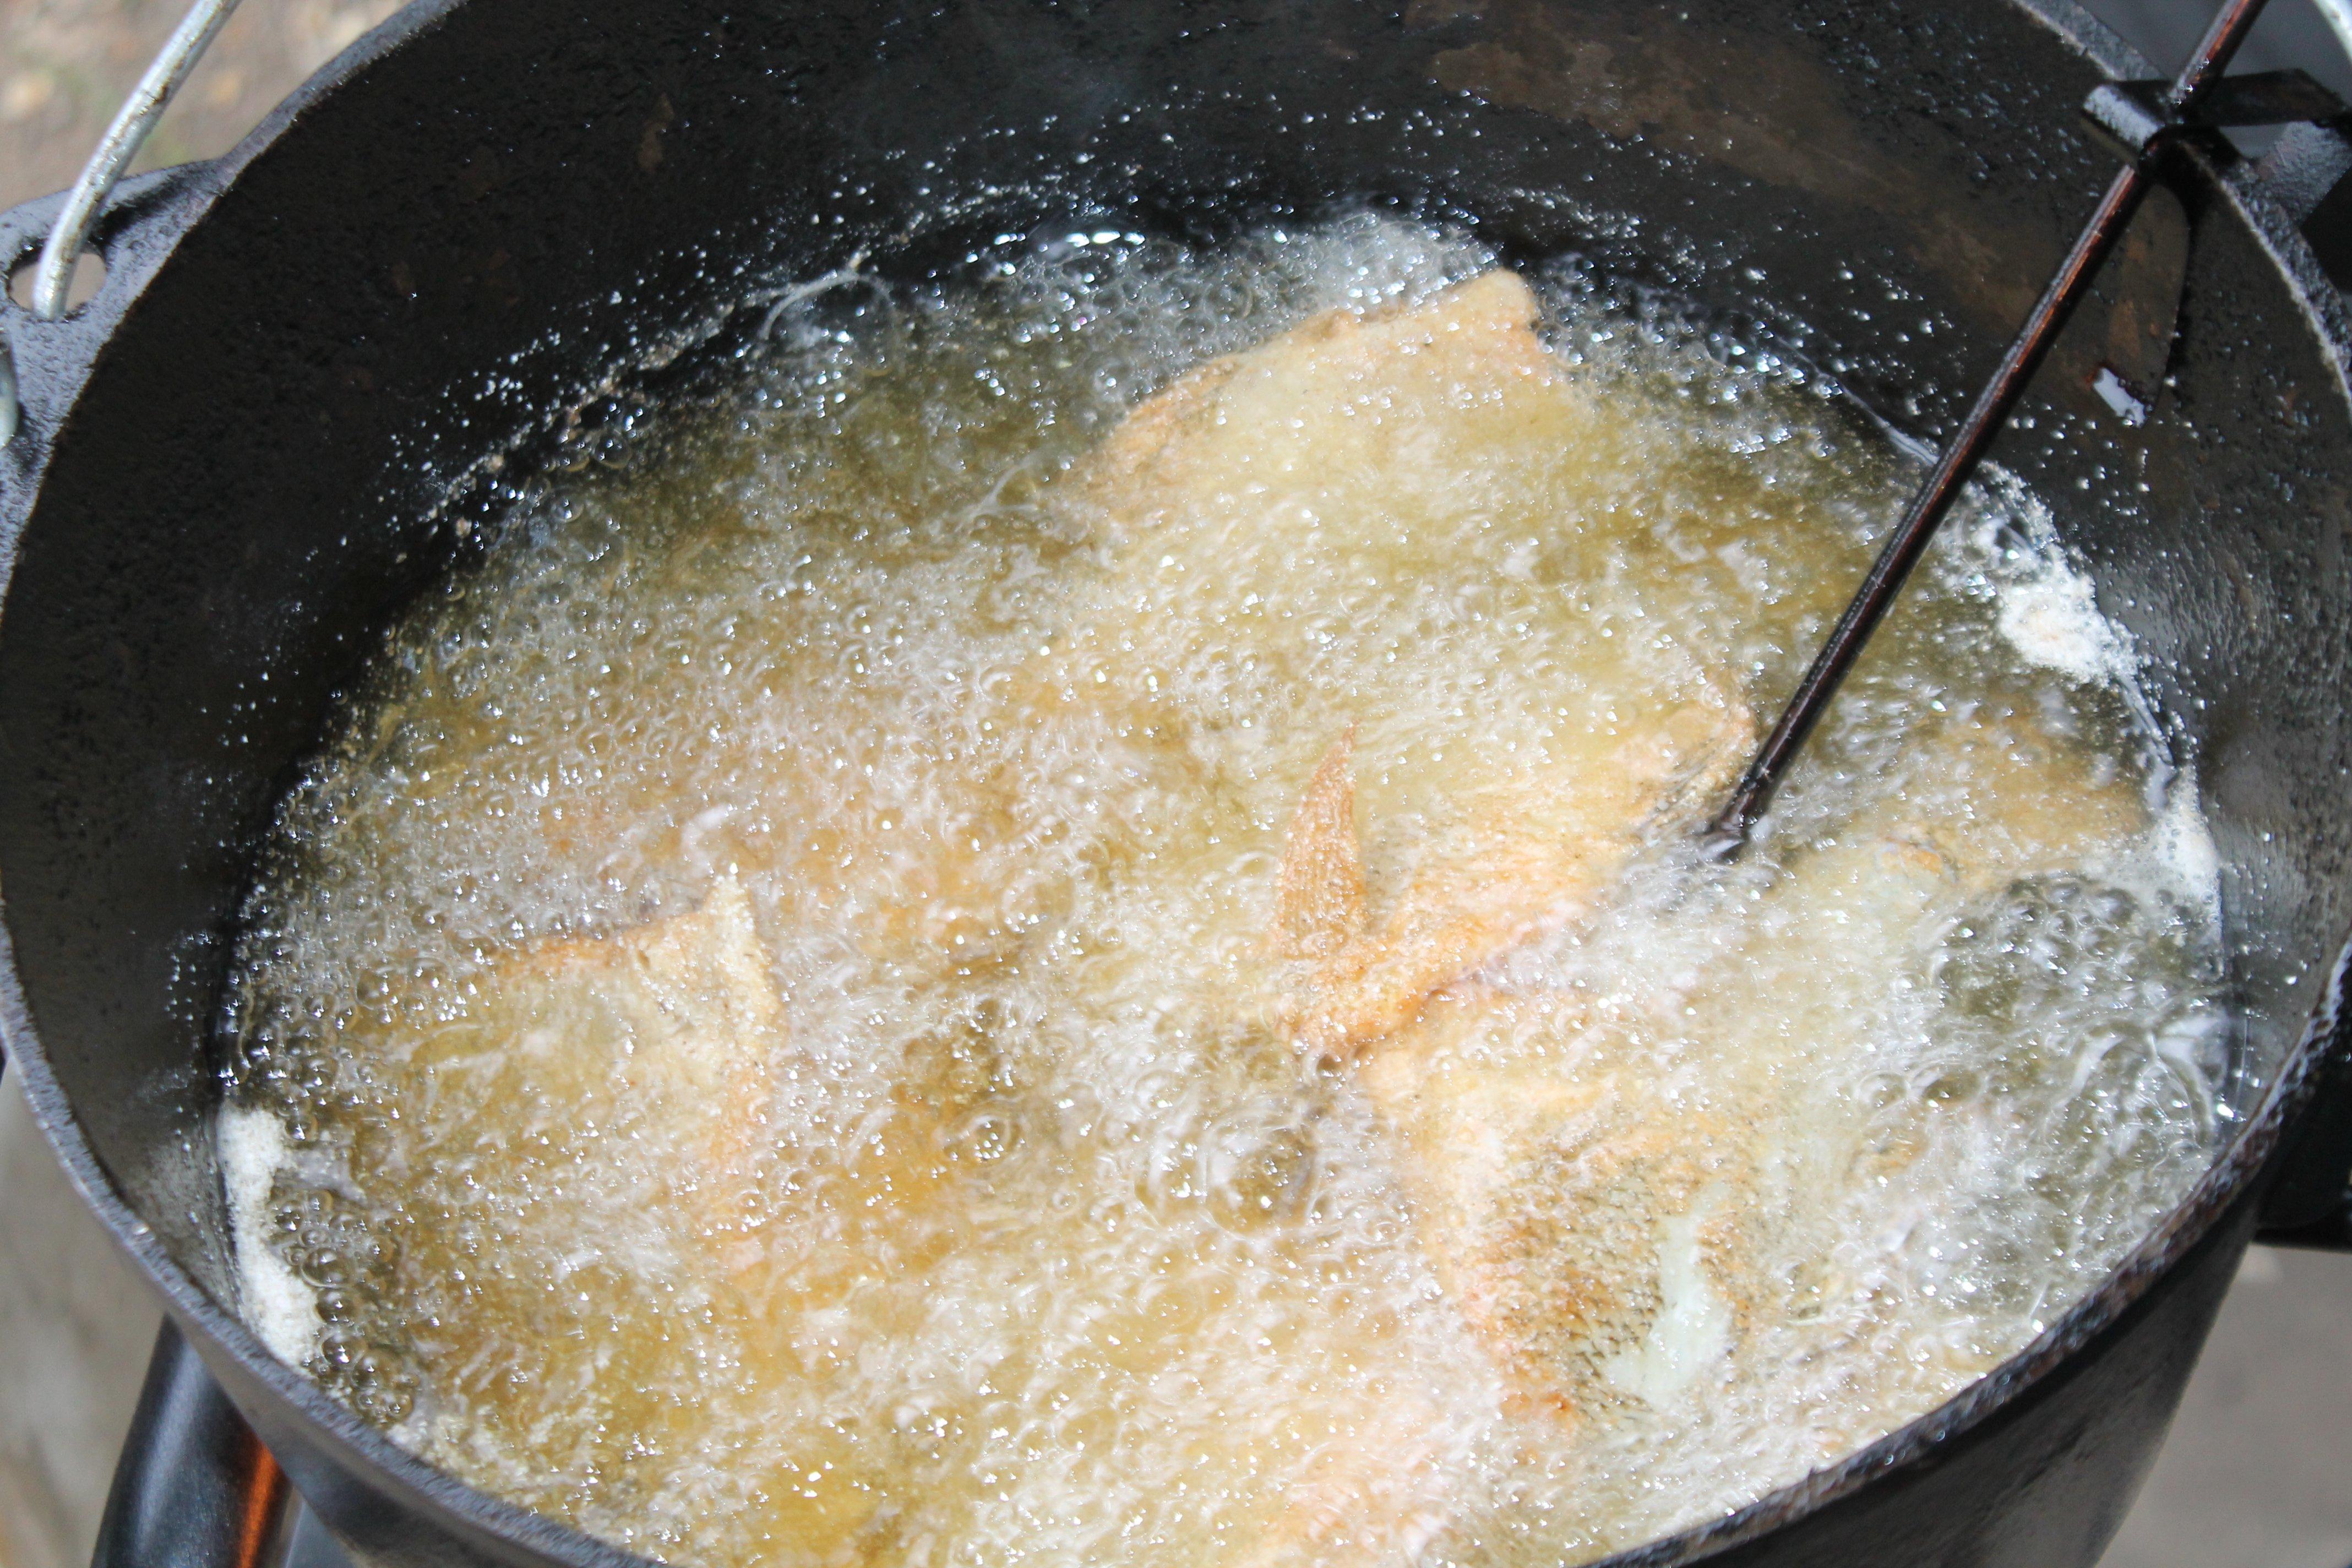 Maintaining a 325-350 degree temperature allows the fish to cook through without overcooking the crust.